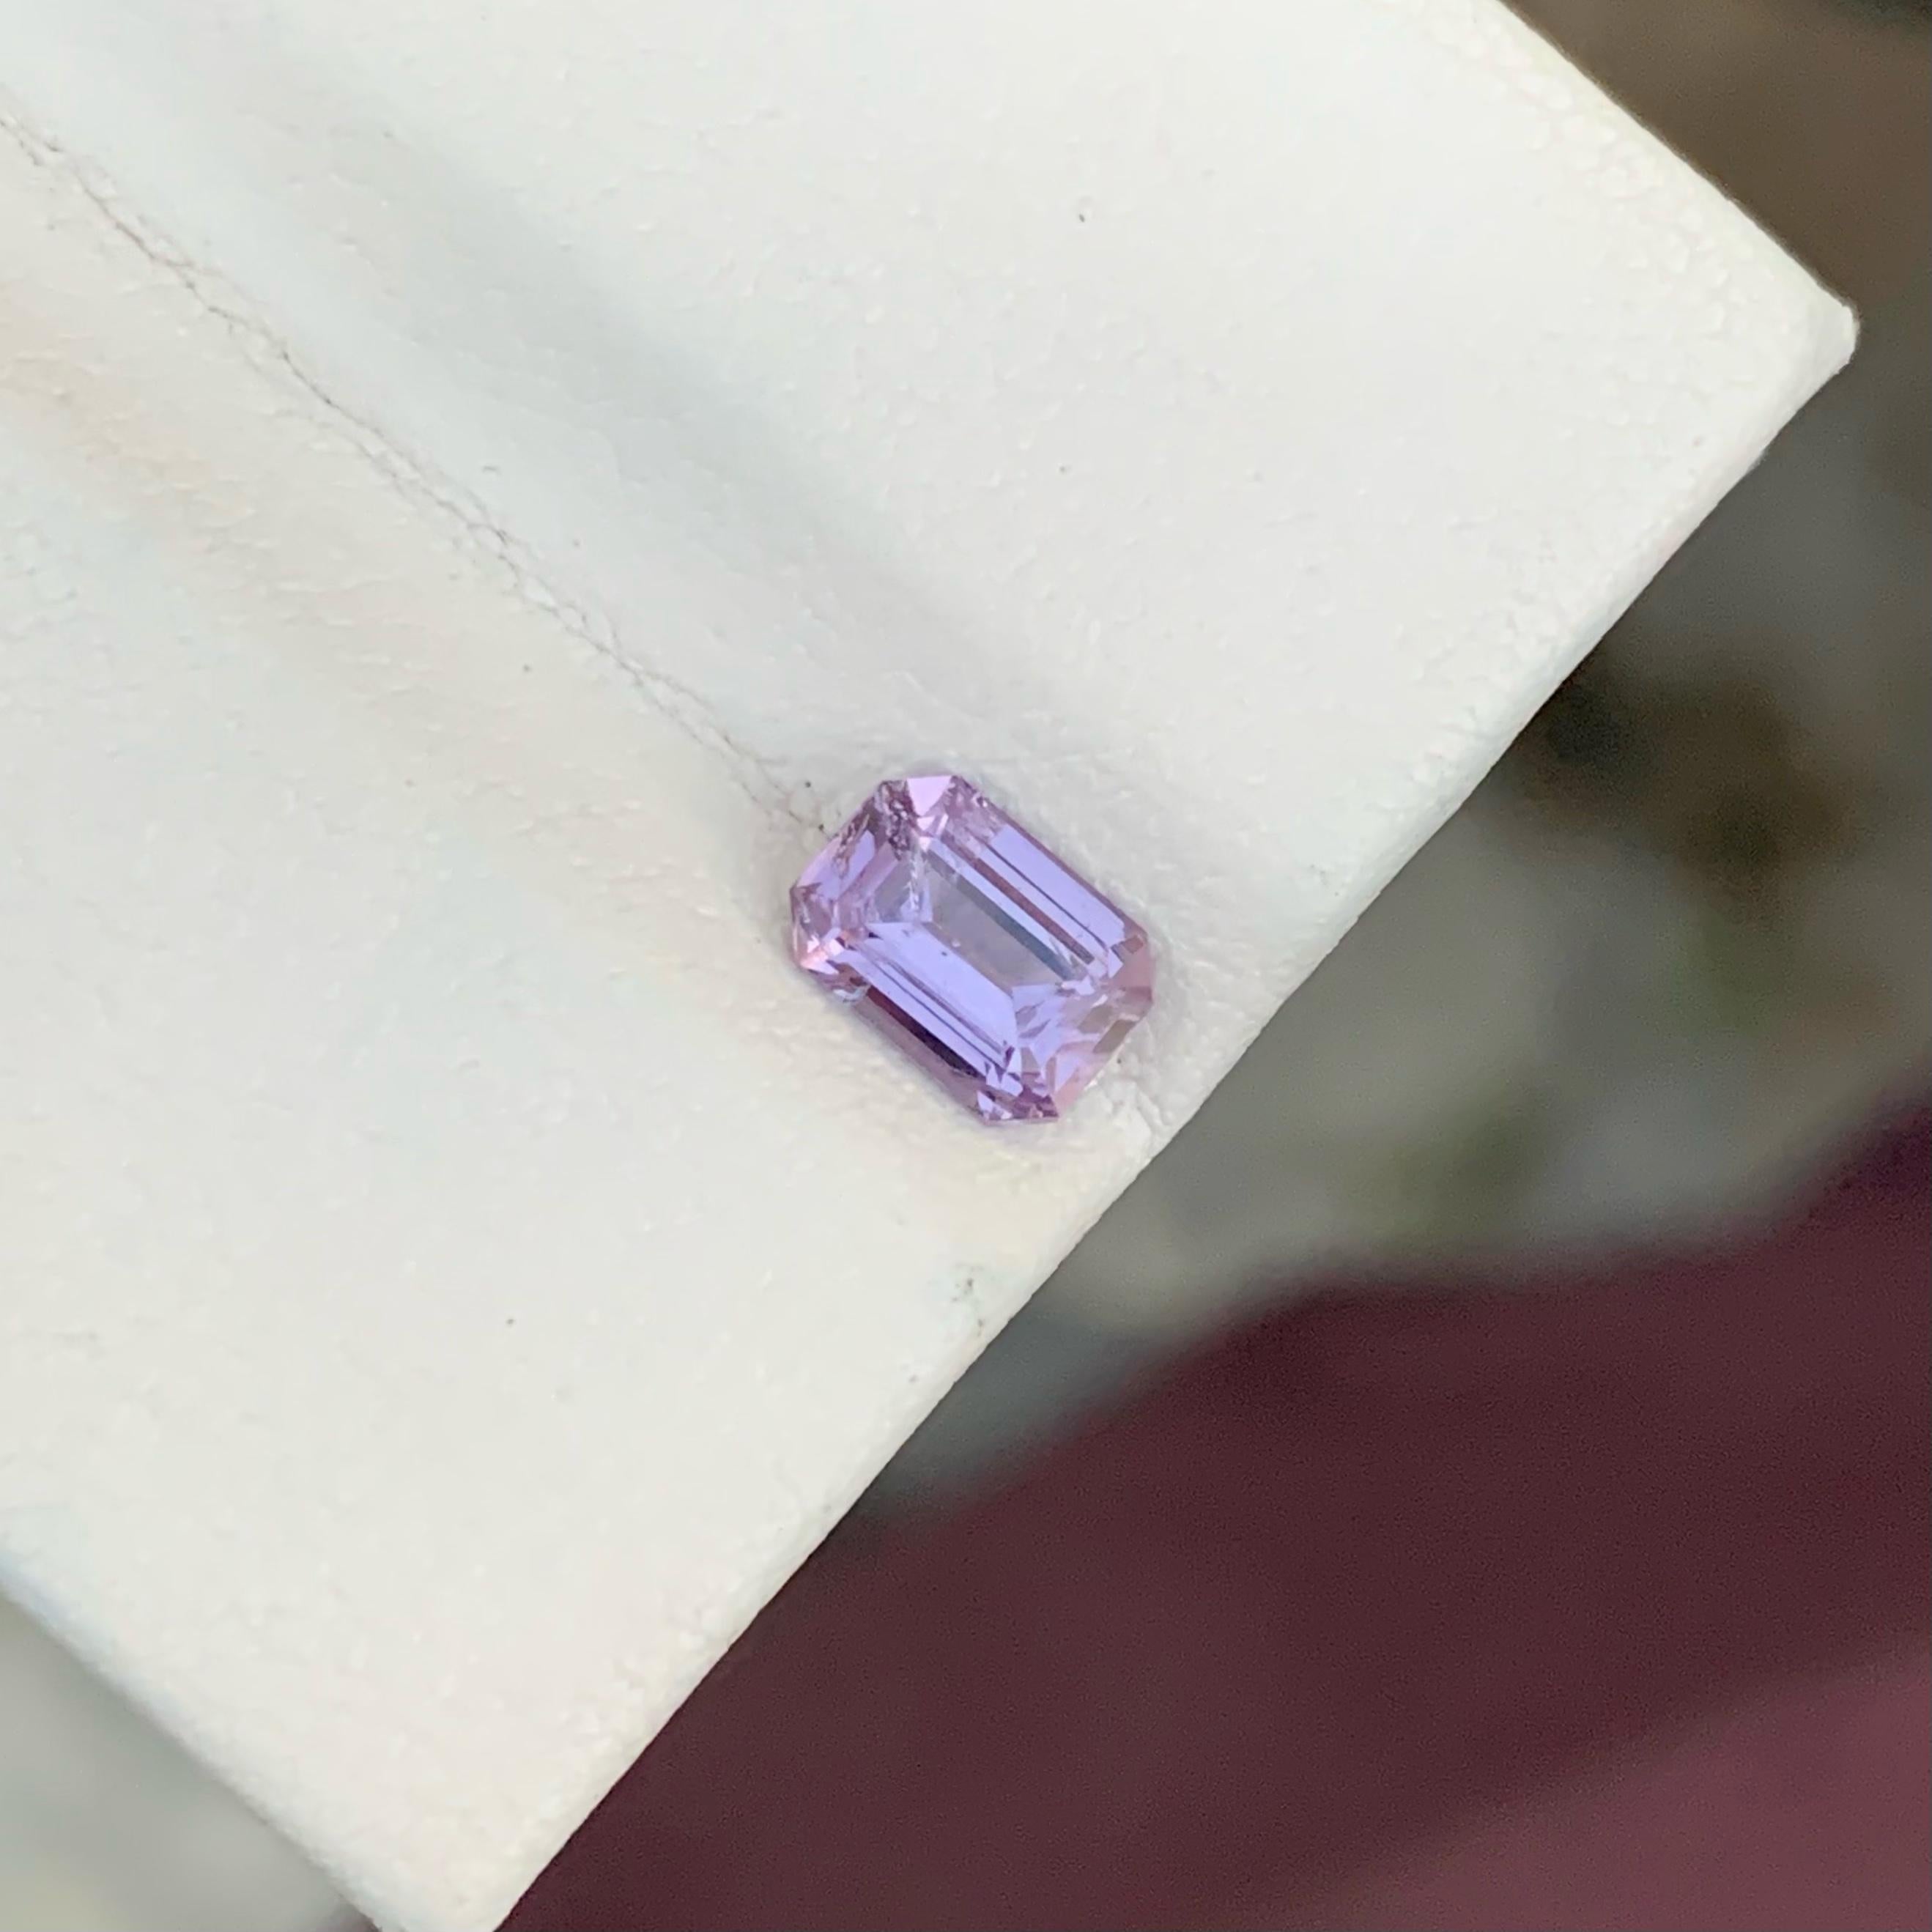 Weight 1.05 carats 
Dimensions 6.9 x 4.9 x 3.6 mm
Treatment None 
Origin Burma 
Clarity SI (Slightly Included)
Shape Octagon 
Cut Emerald 



The Meticulously Purple Hued Spinel is an exquisite gemstone that captivates with its alluring beauty. With